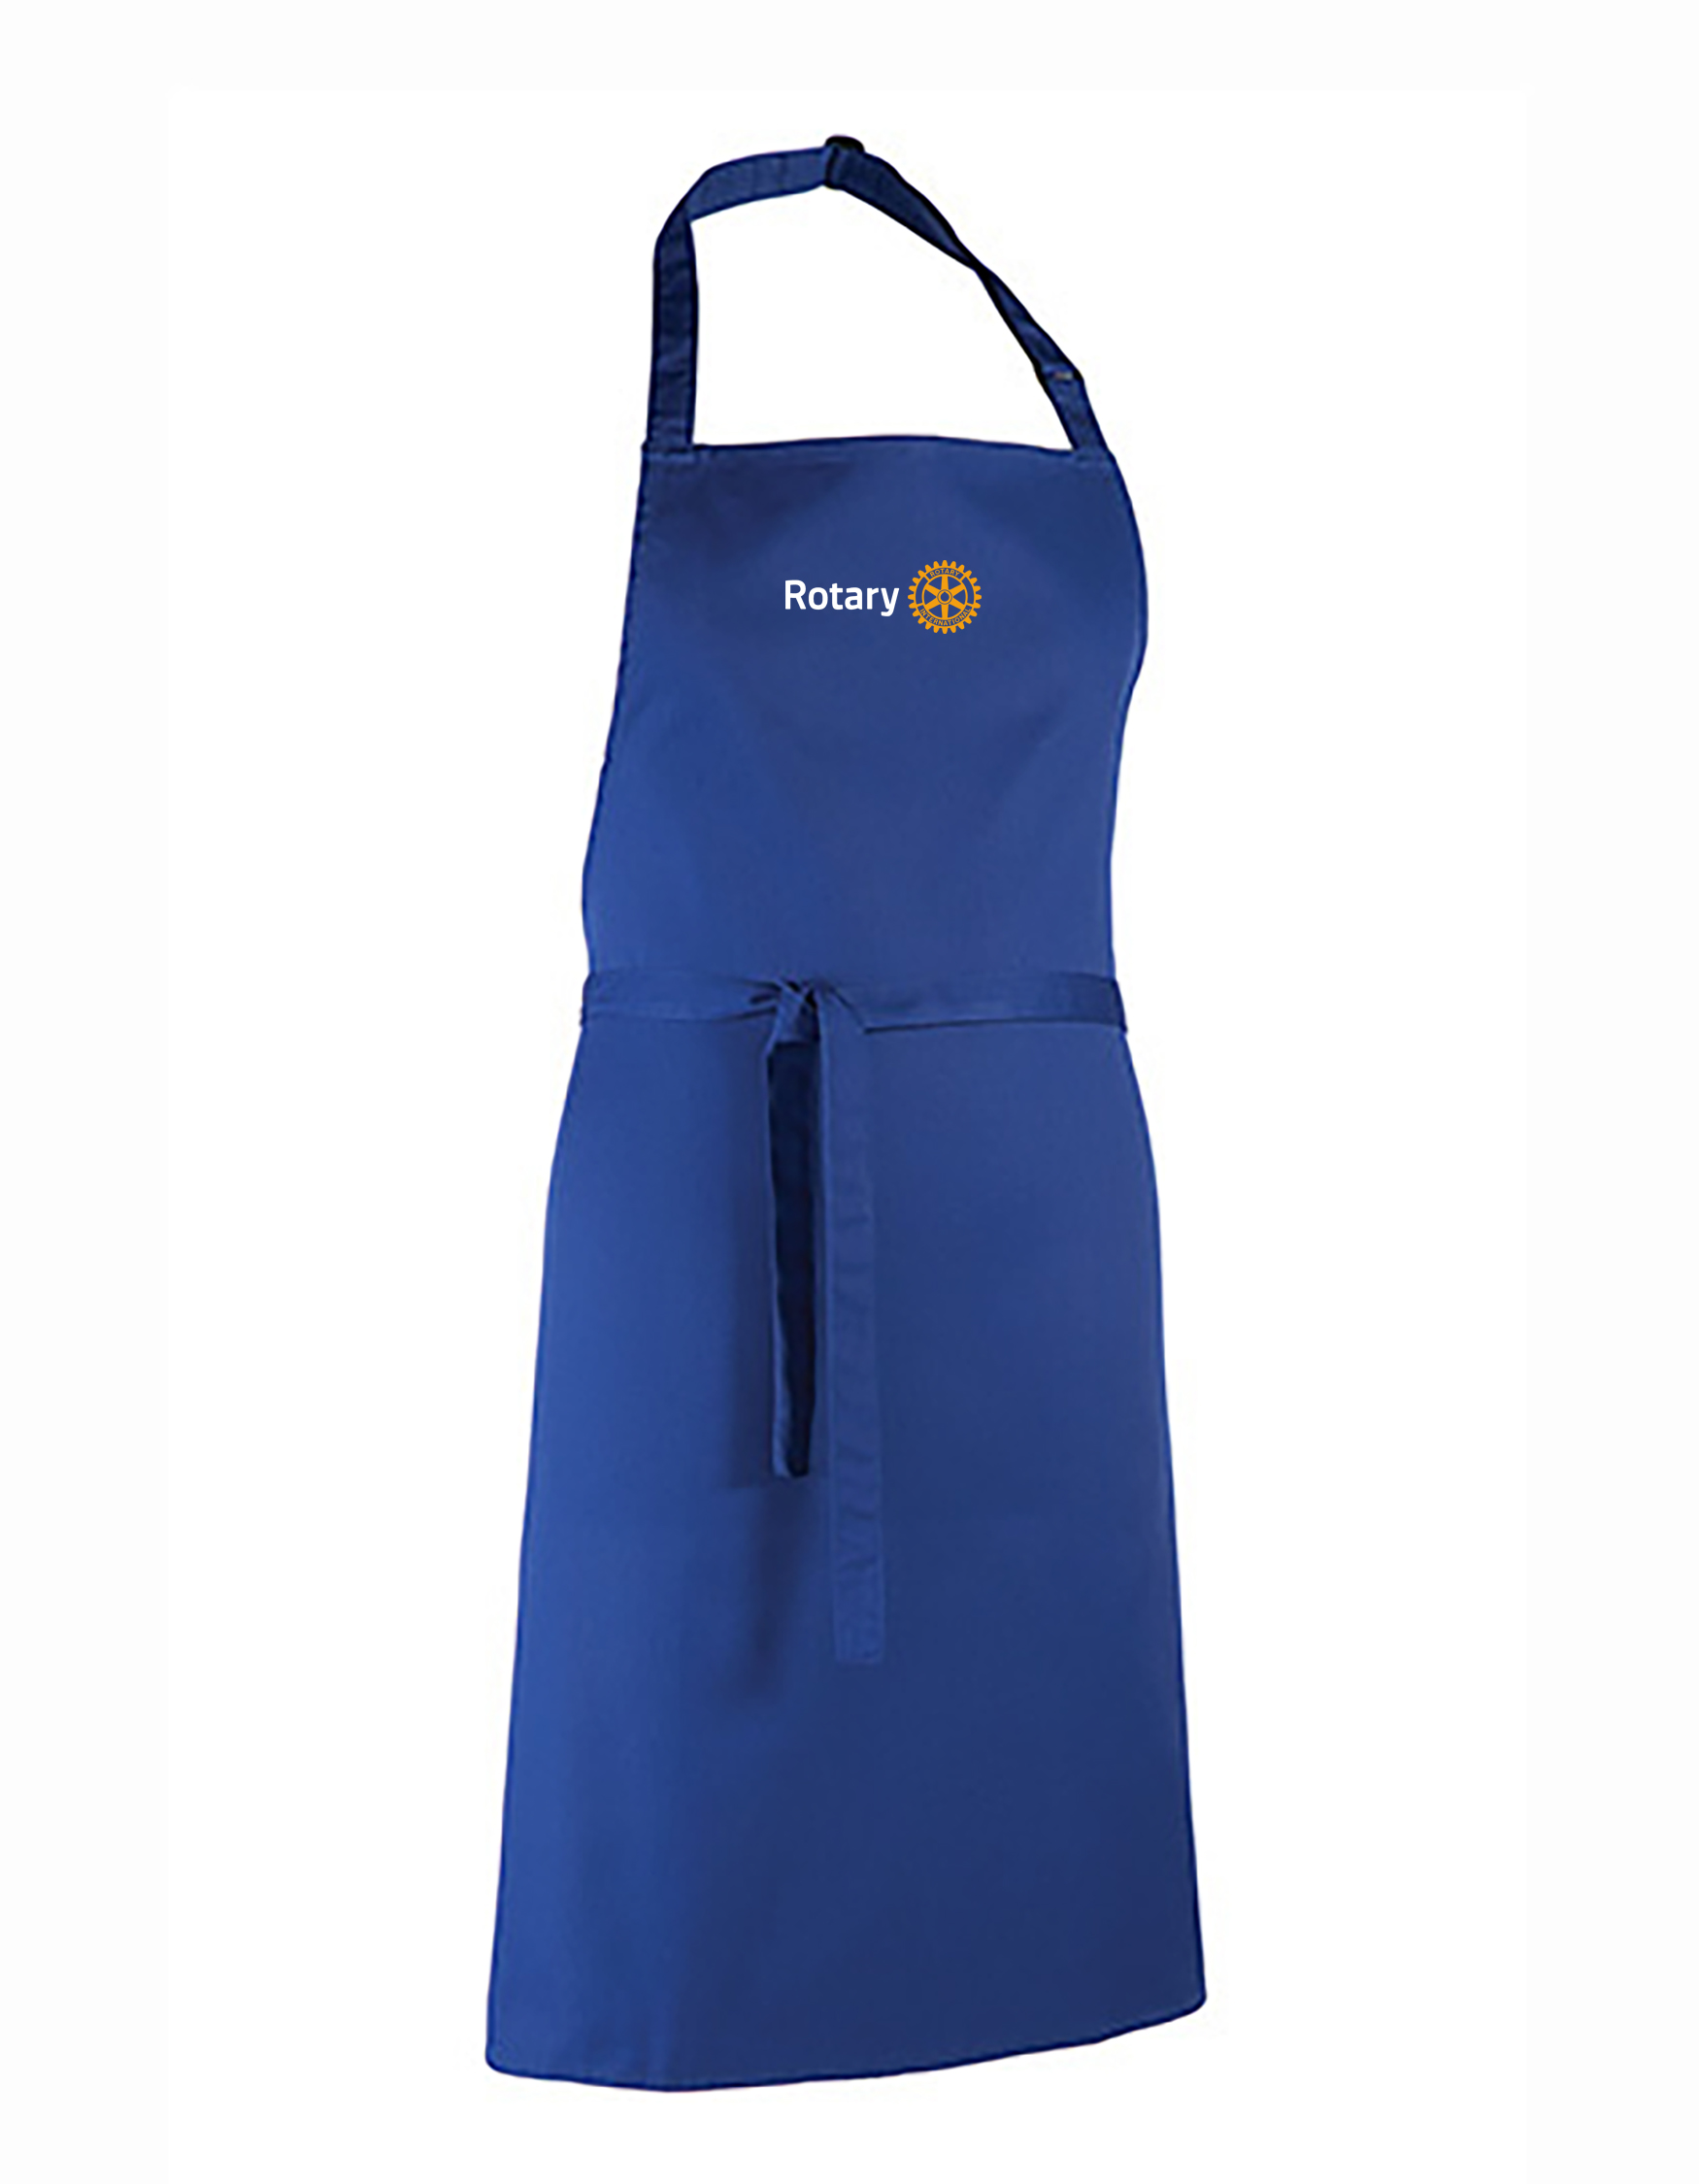 Apron with Embroidery